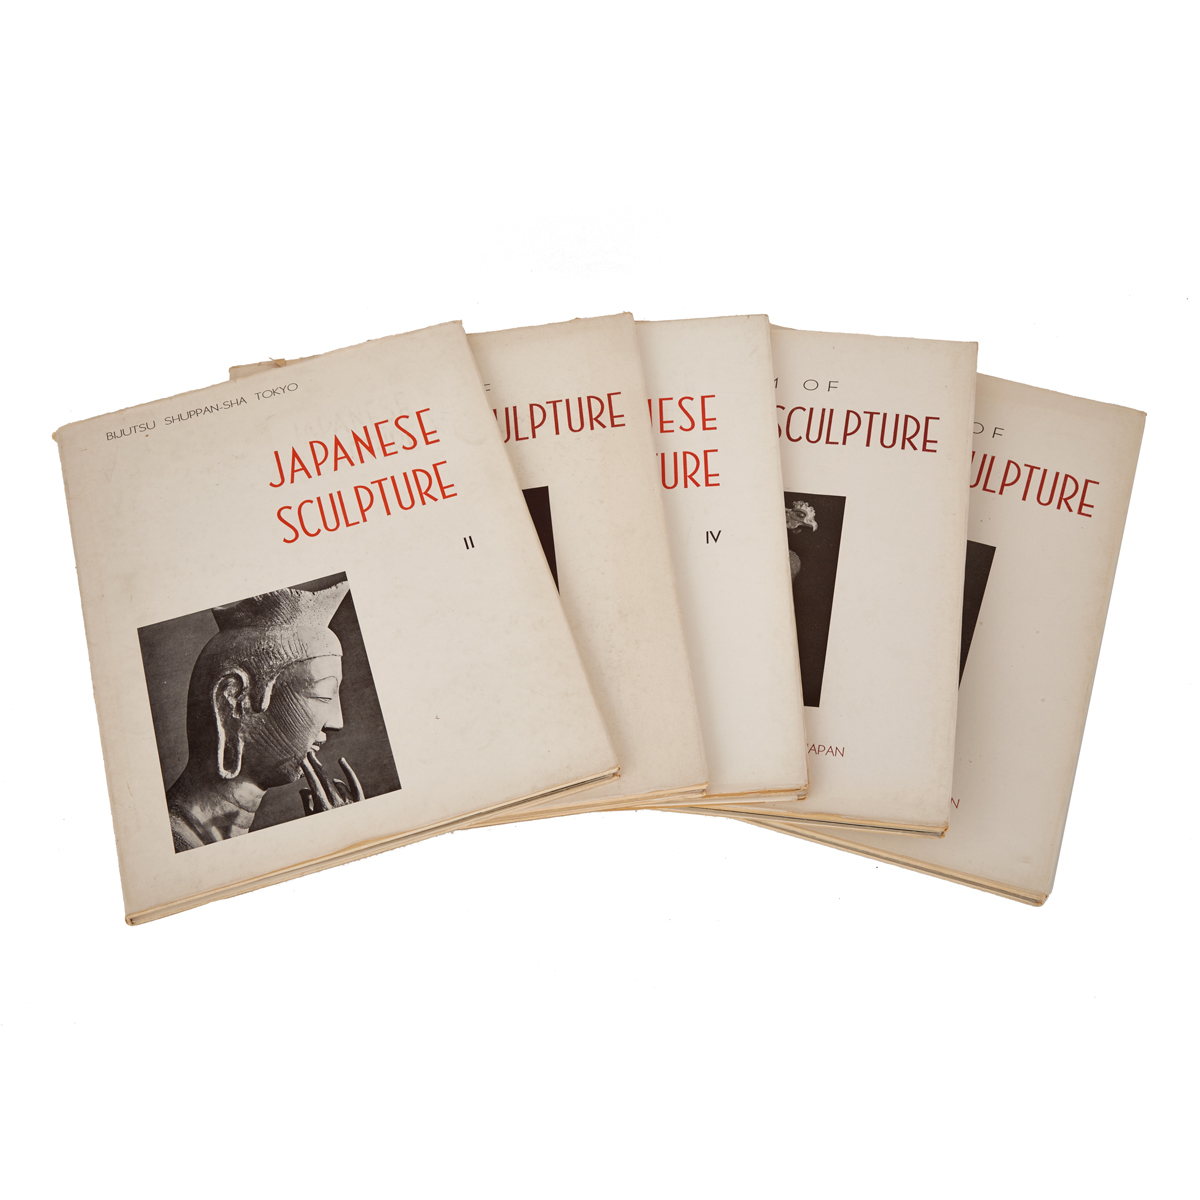 Five Albums of “Japanese Sculpture”